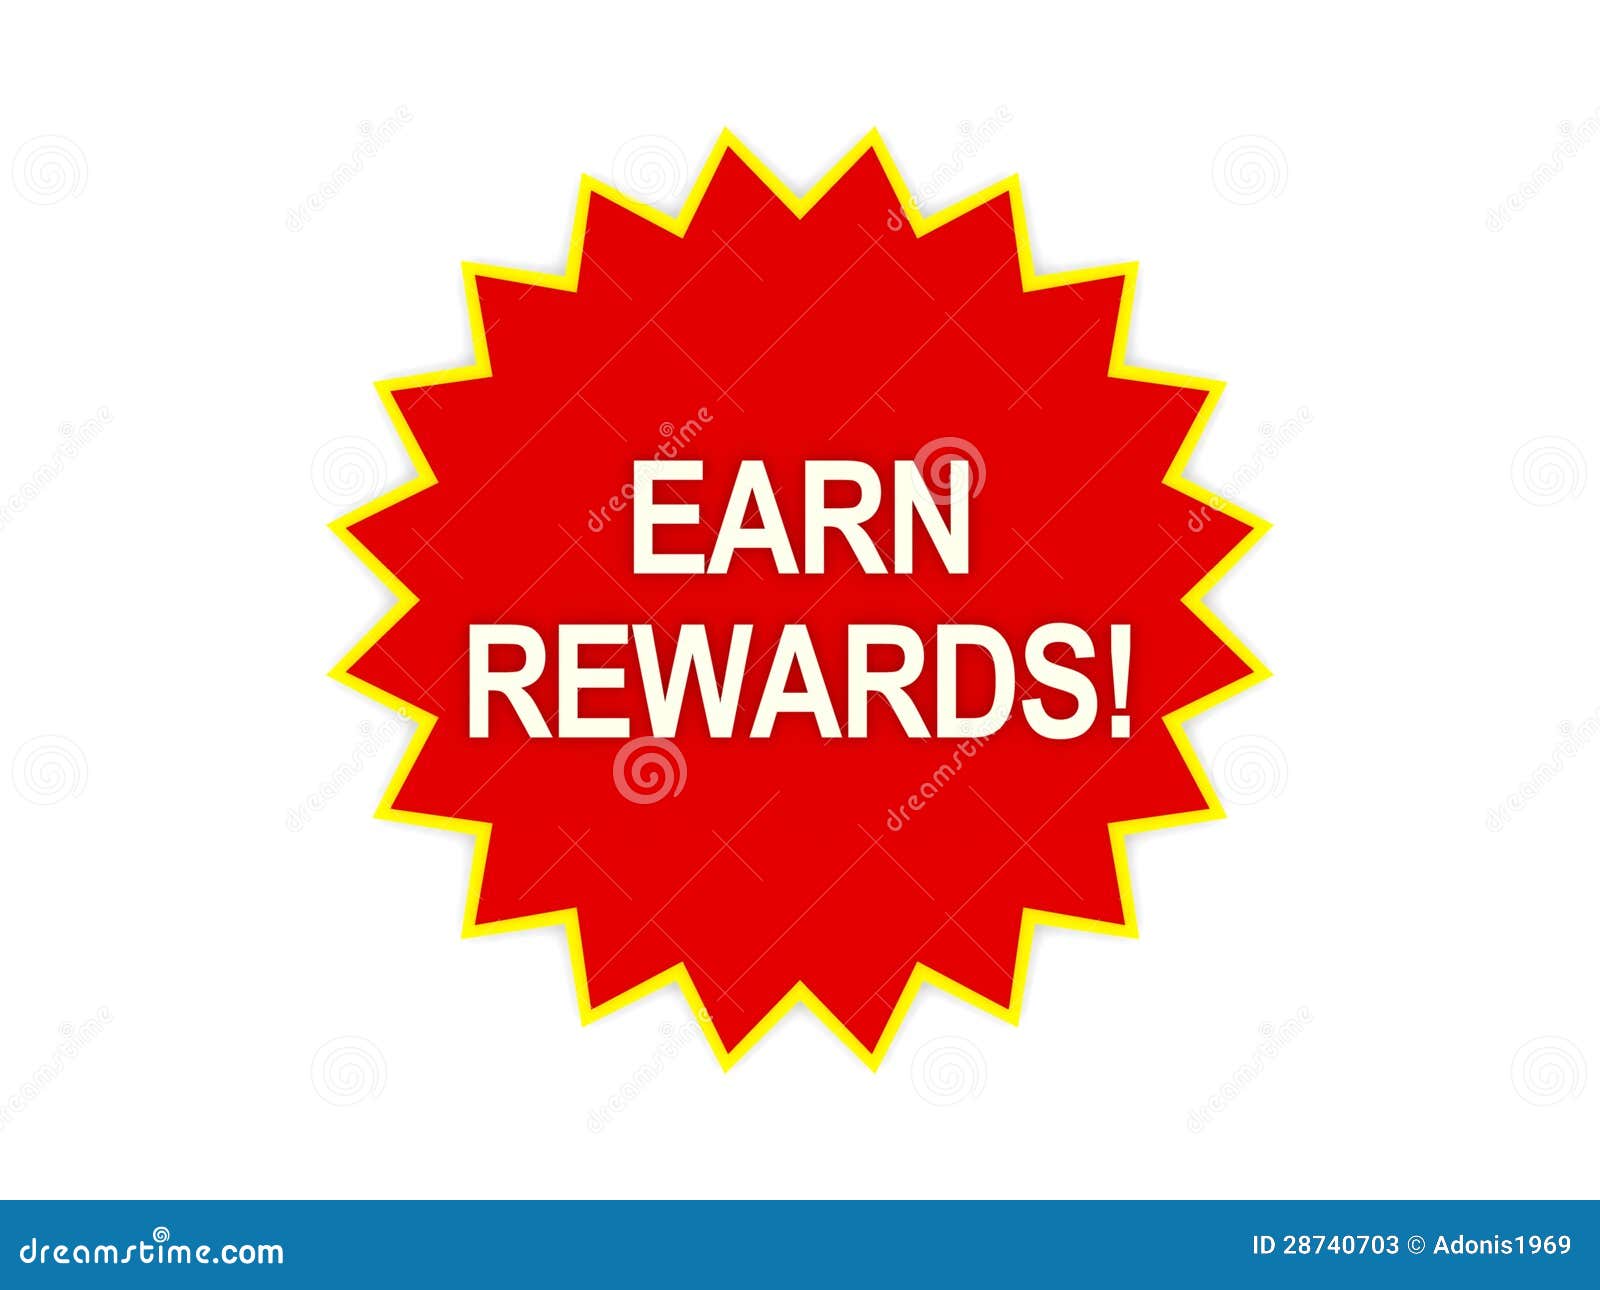 earn rewards message on red star